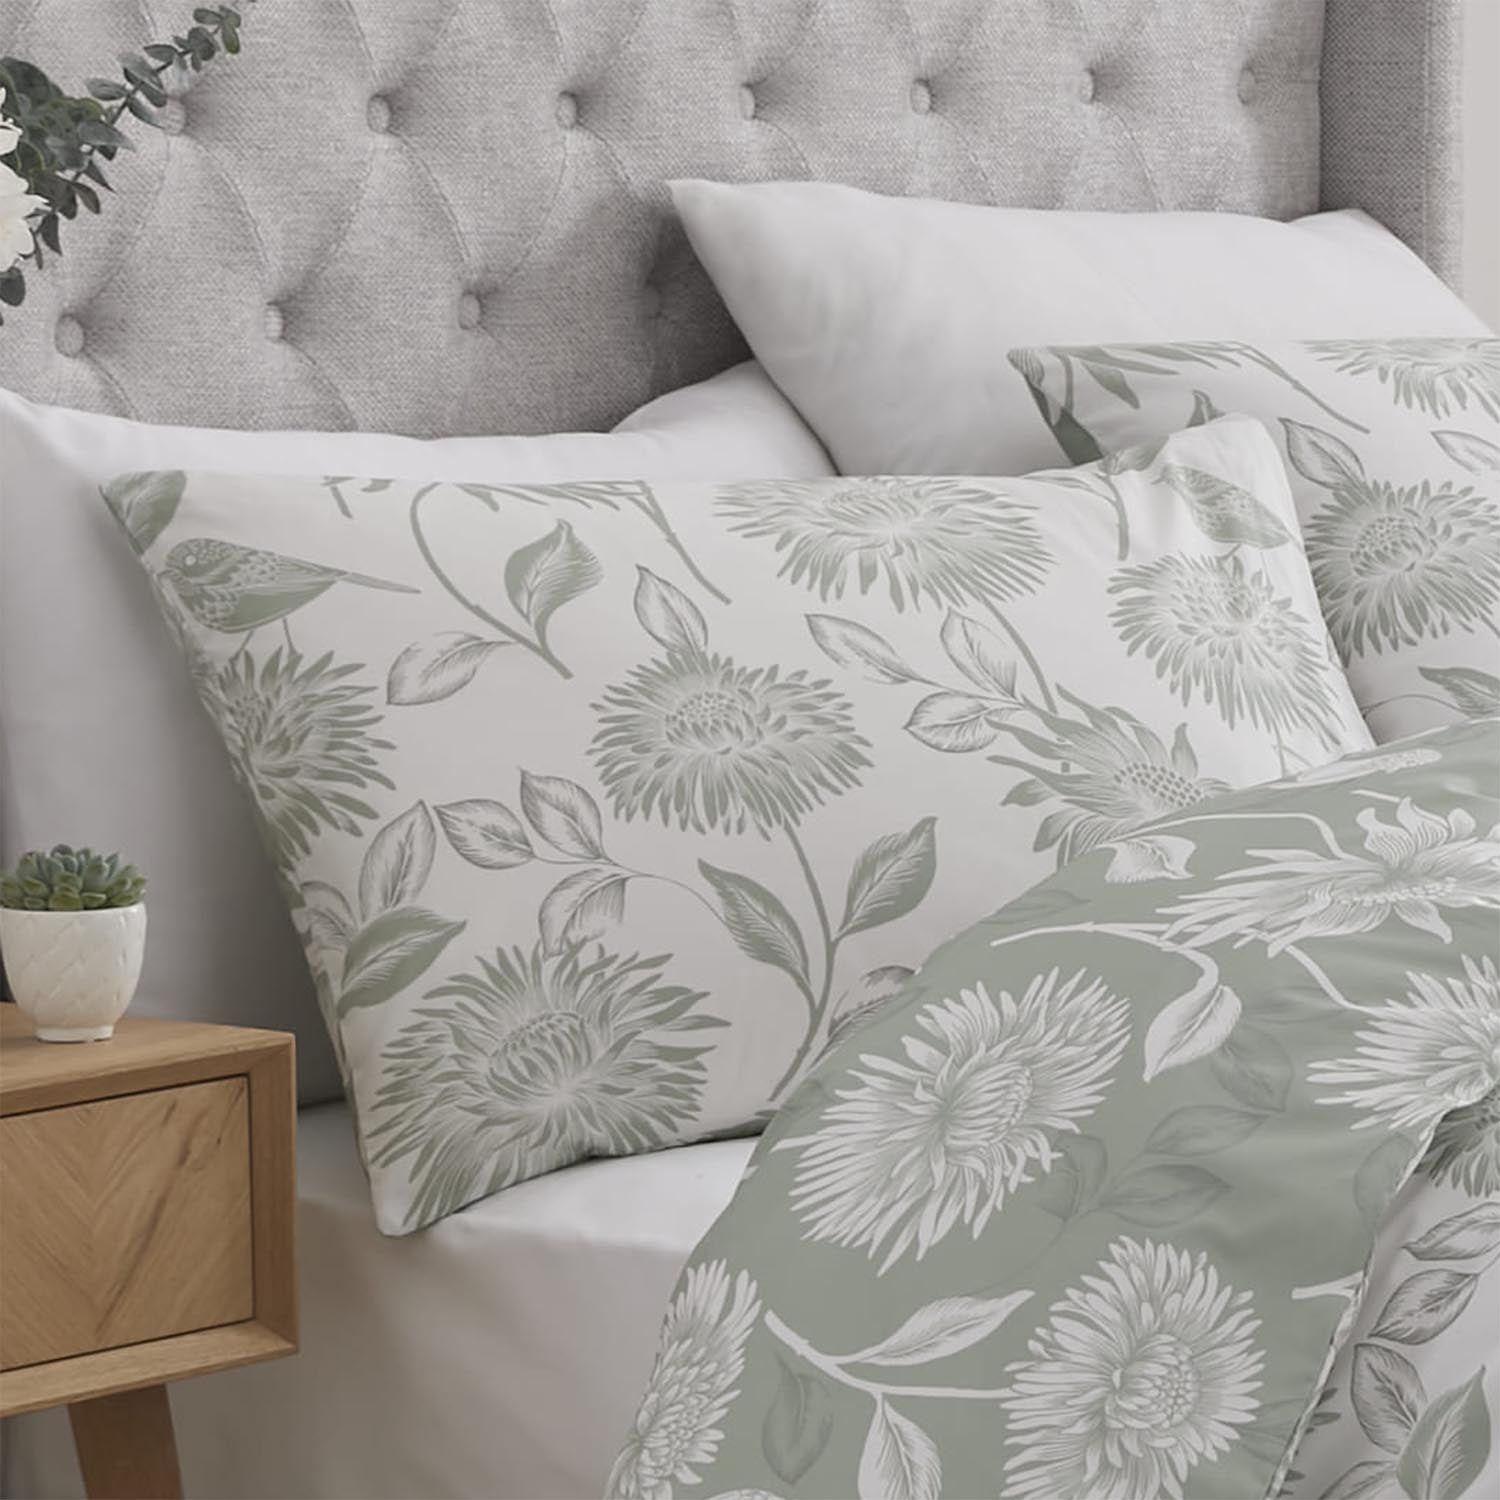  The Home Collection Veronique Teal Duvet Cover Set 2 Shaws Department Stores